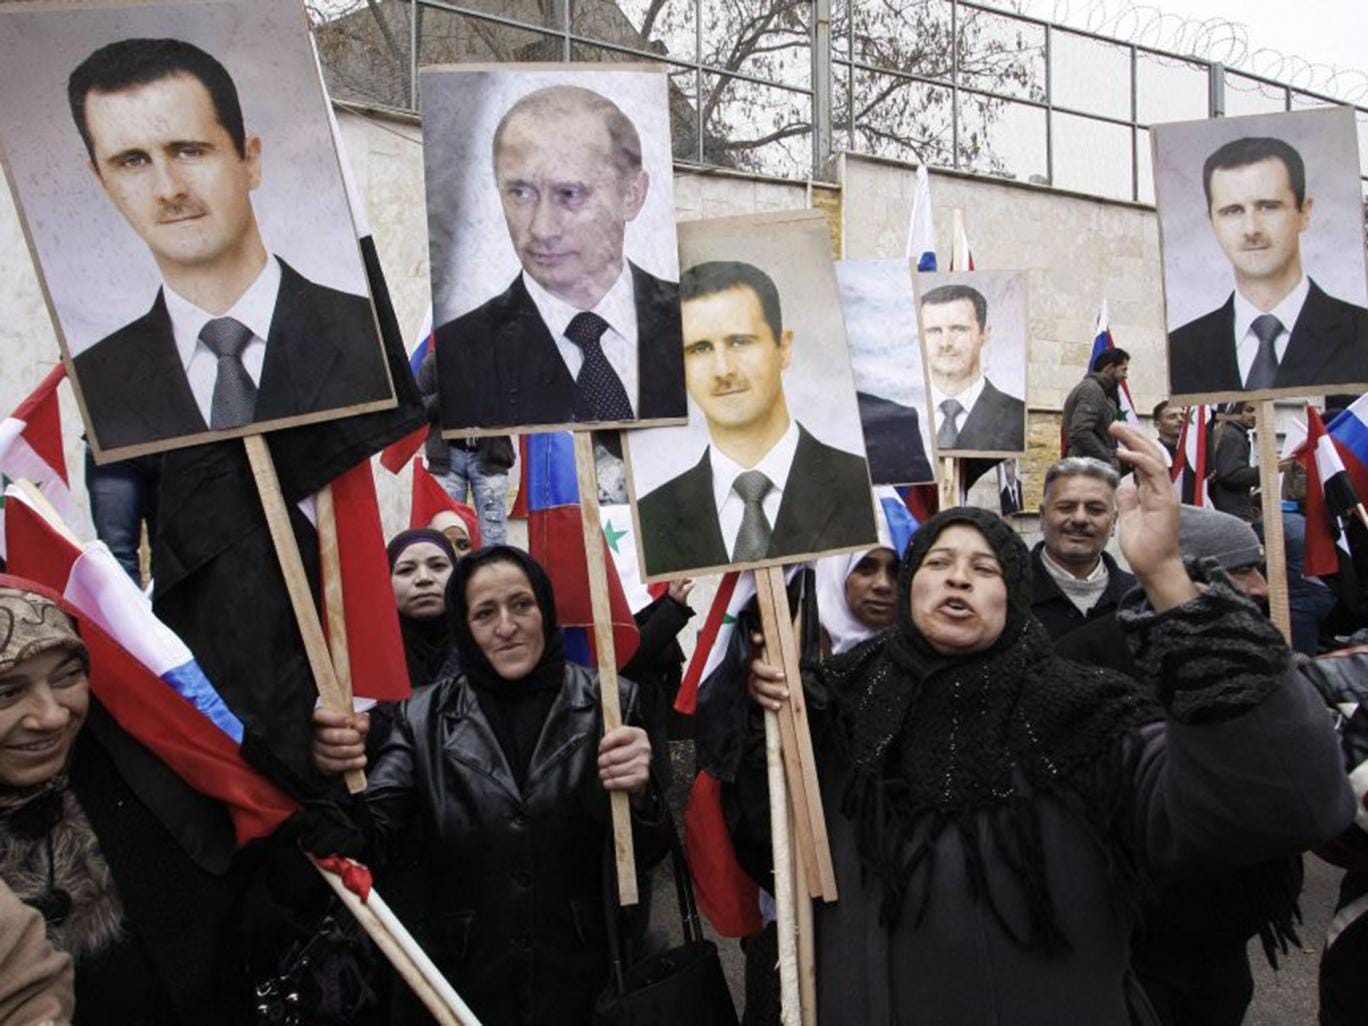 Russia has been one of Syrian President Bashar al-Assad’s strongest allies over recent years, and used its veto power four times at the UN Security Council to prevent international sanctions on Syria